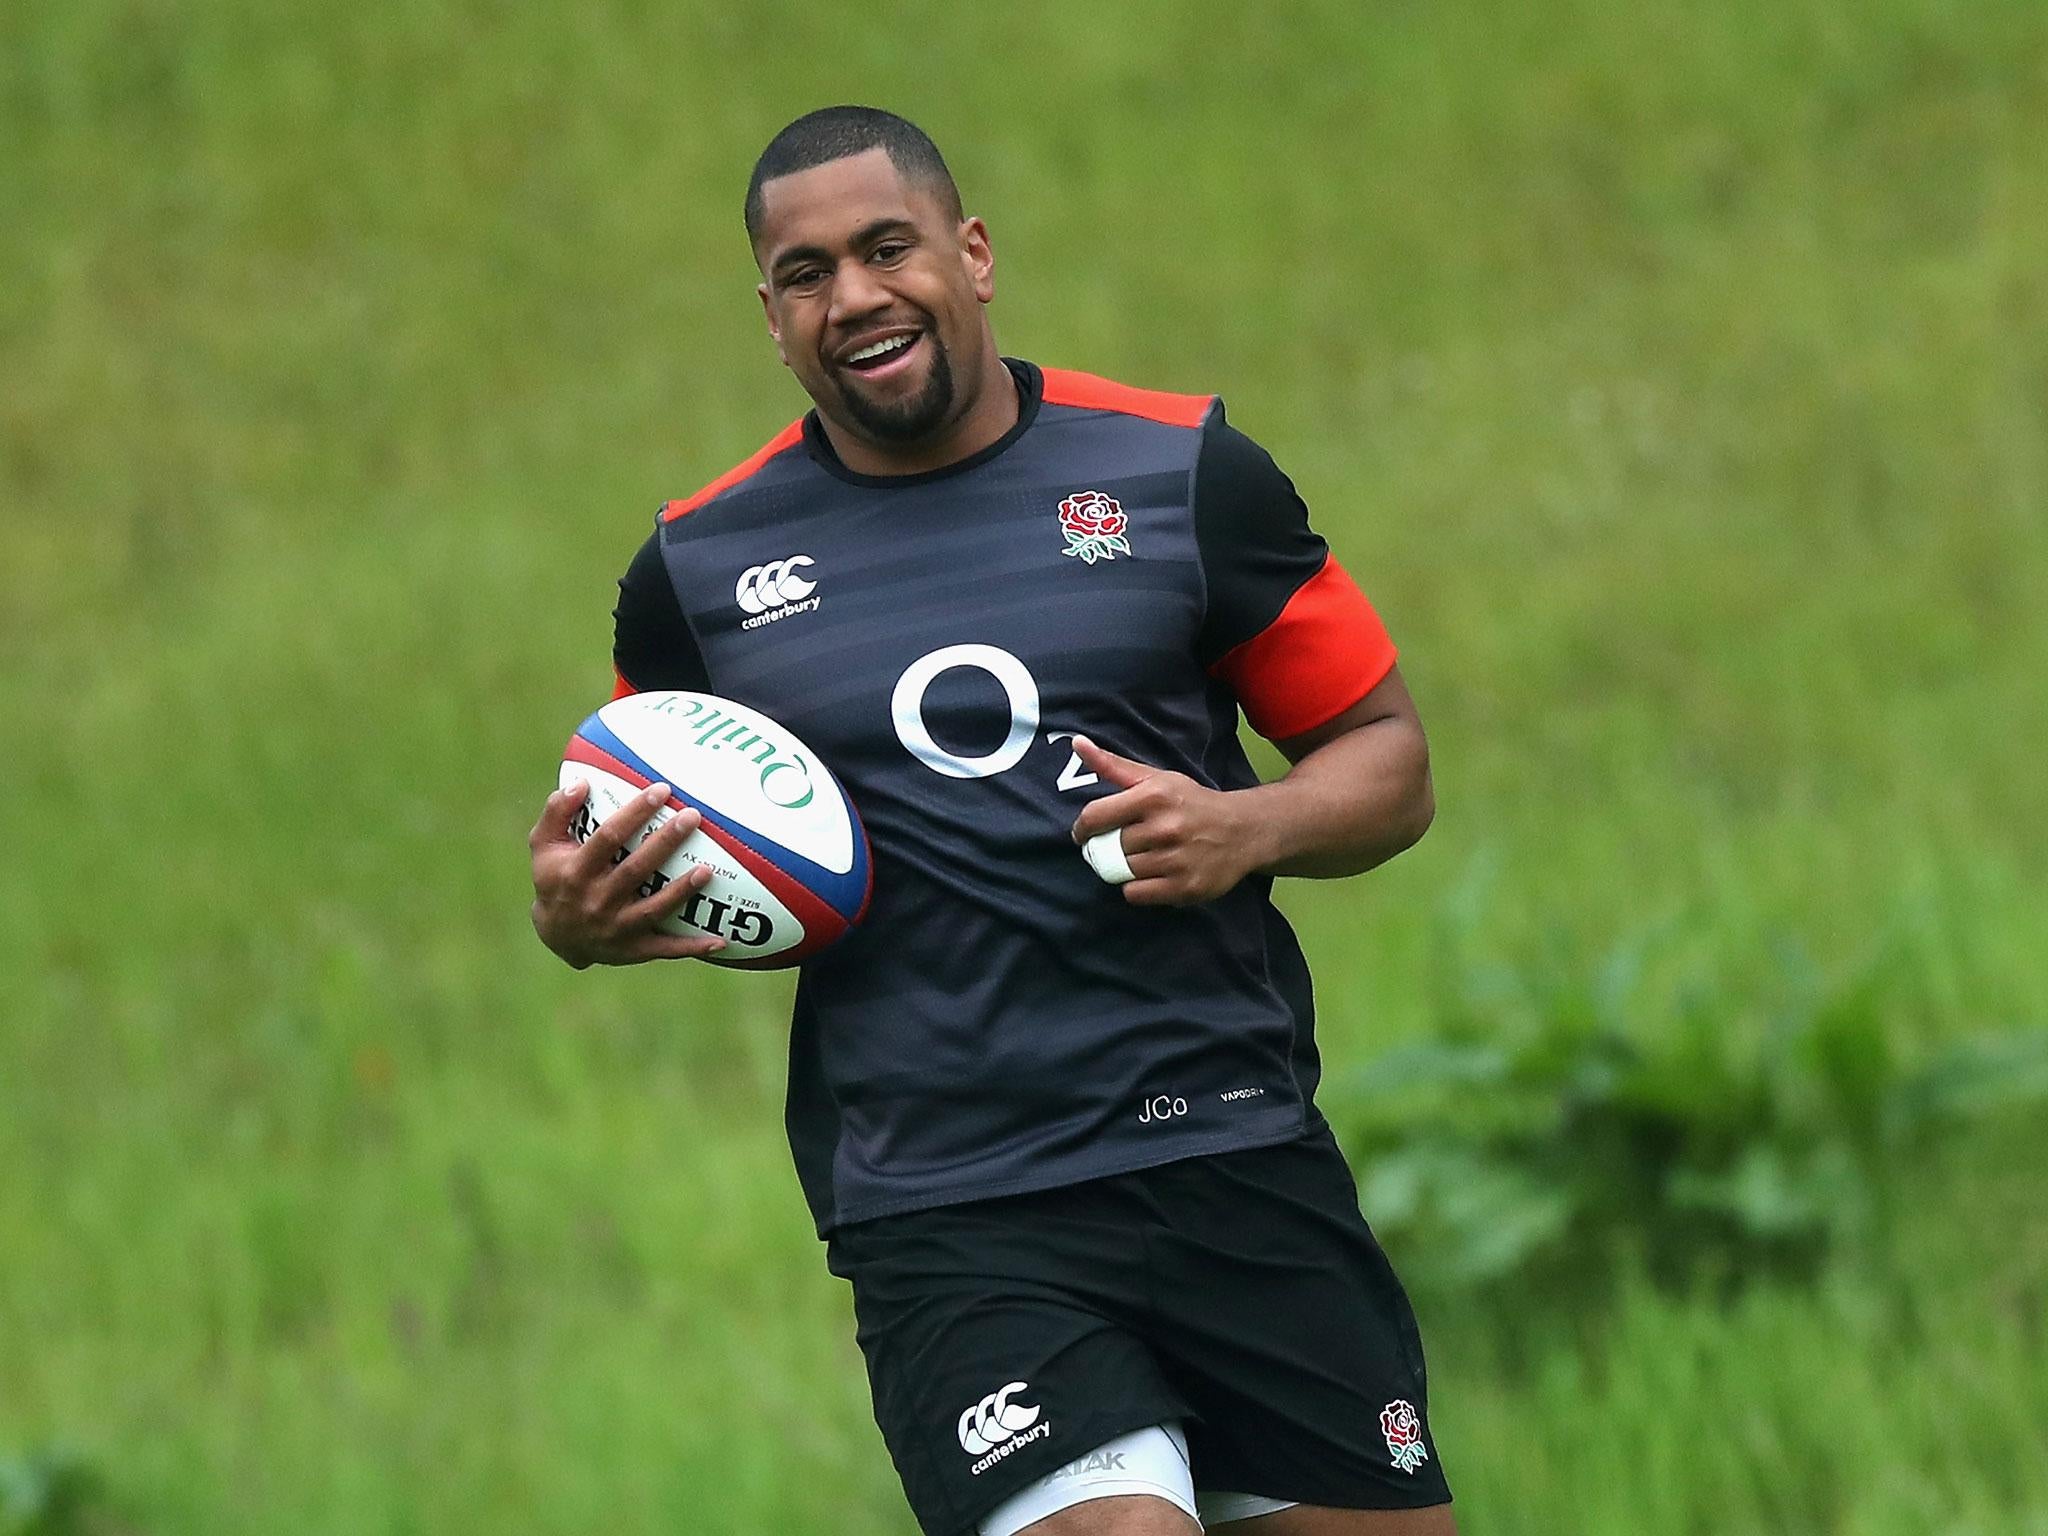 Cokanasiga can offer England something they currently lack out wide (Getty)